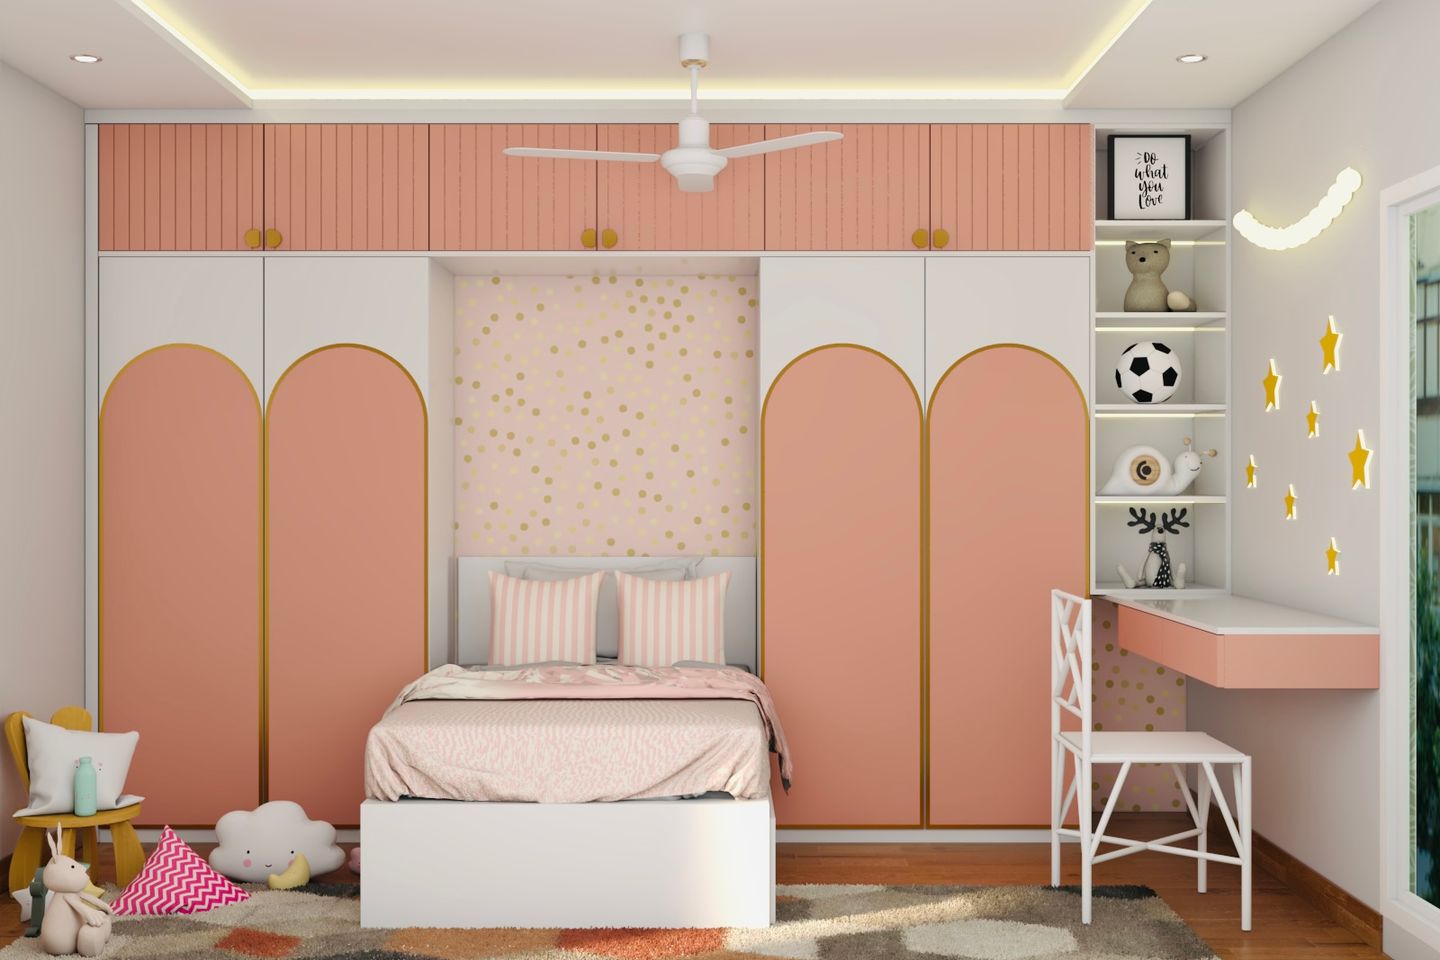 Kids Room Design With Single Bed And Pink Study Unit - Livspace